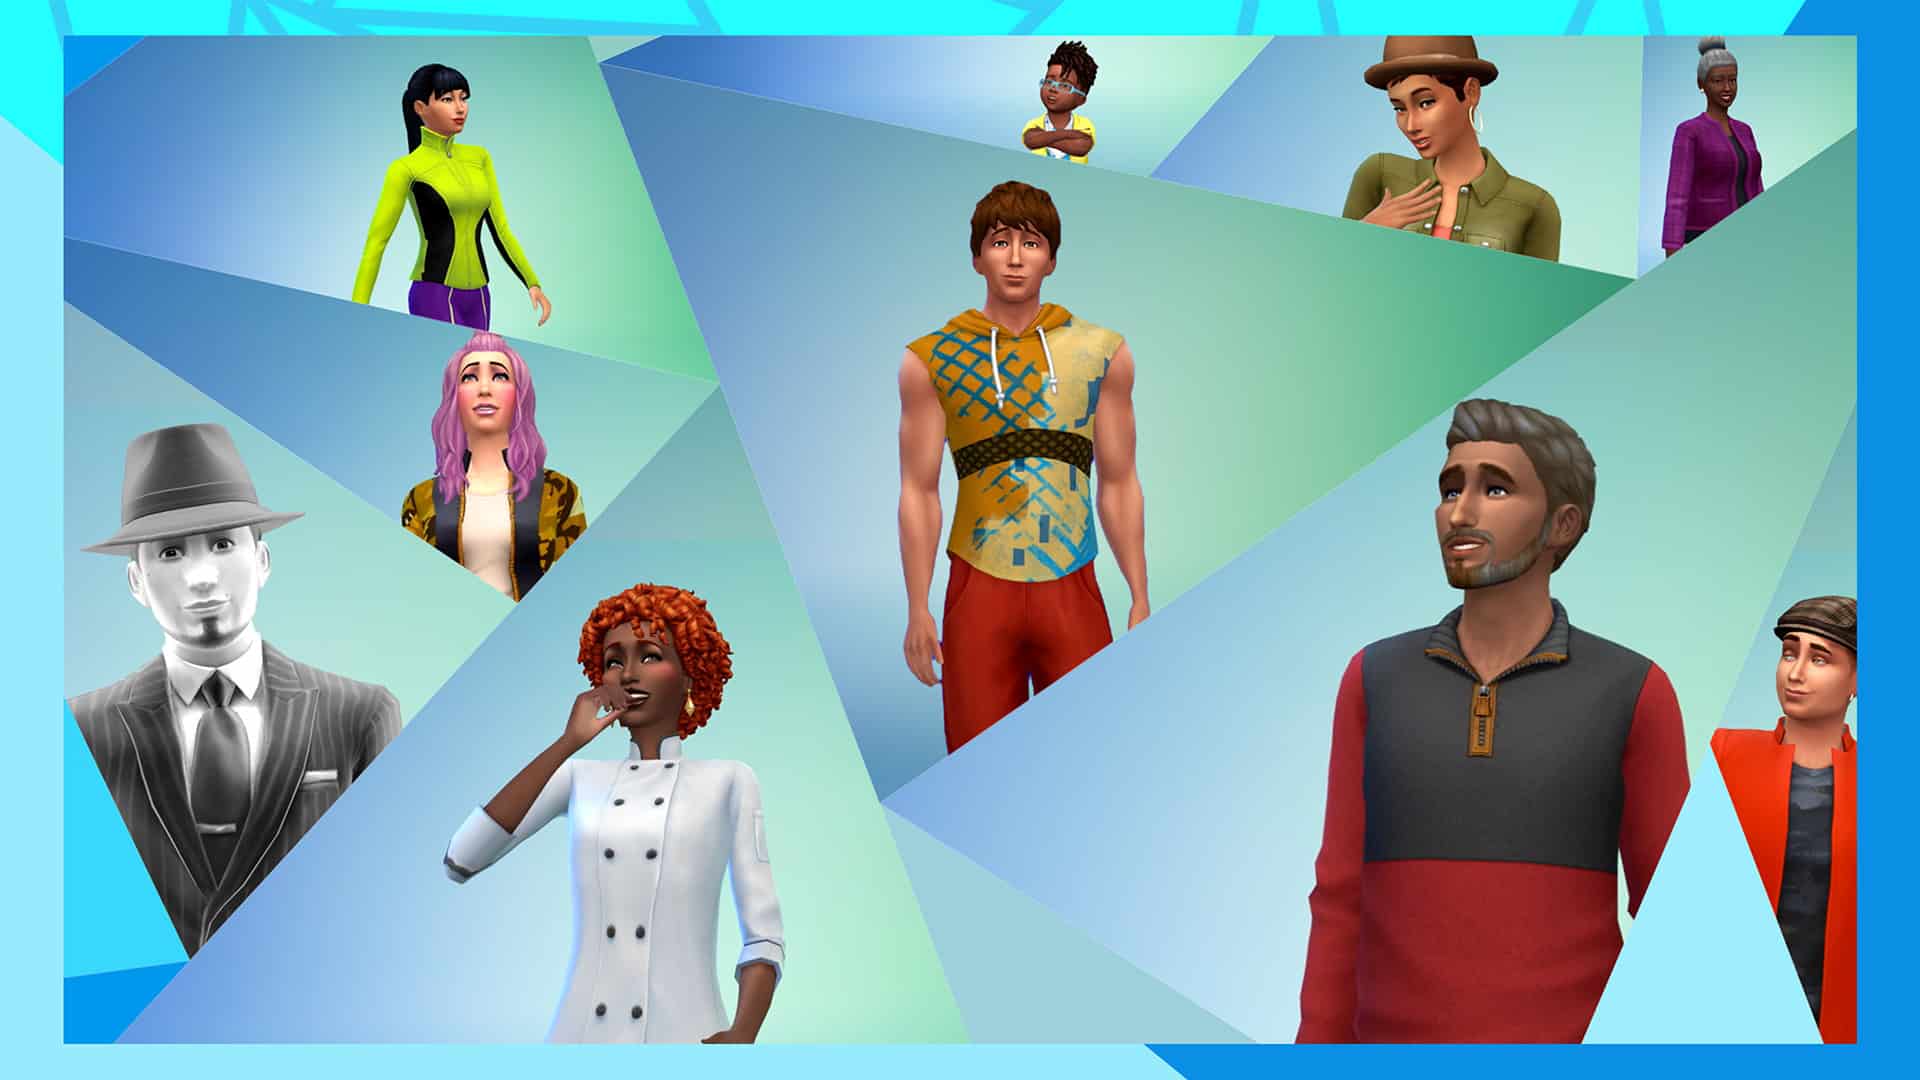 How To Do the Sims 4 Motherlode Cheat